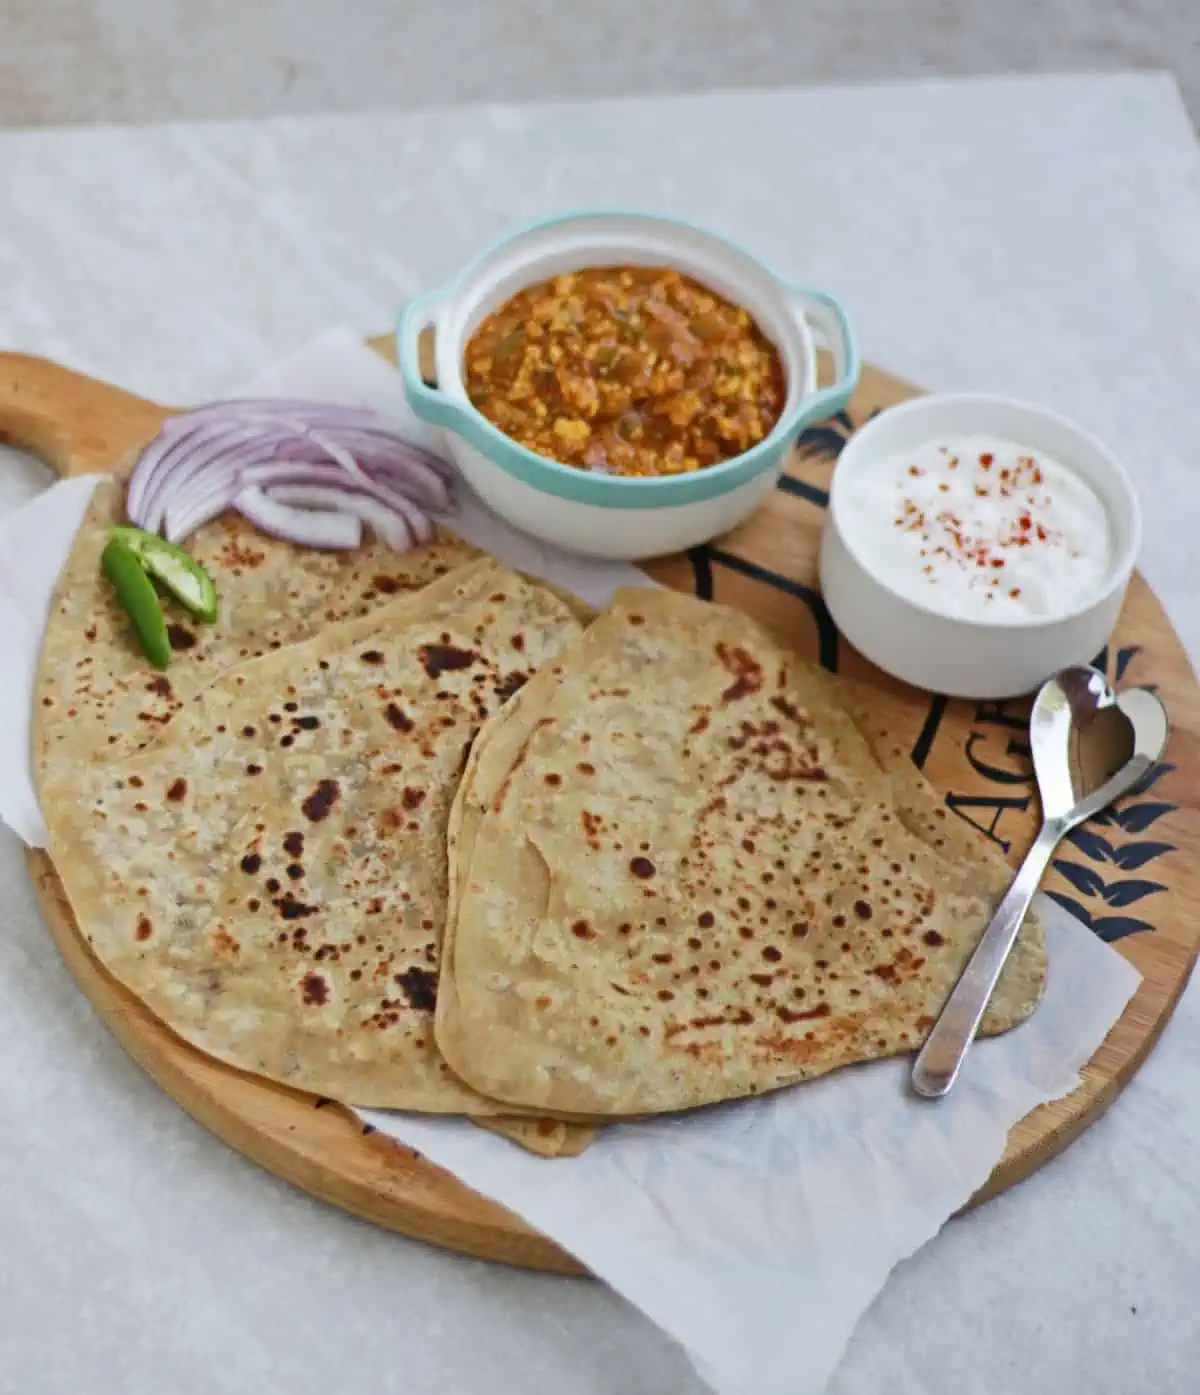 Paratha along with subzi and yogurt and sliced onion and green chilies on a plate.